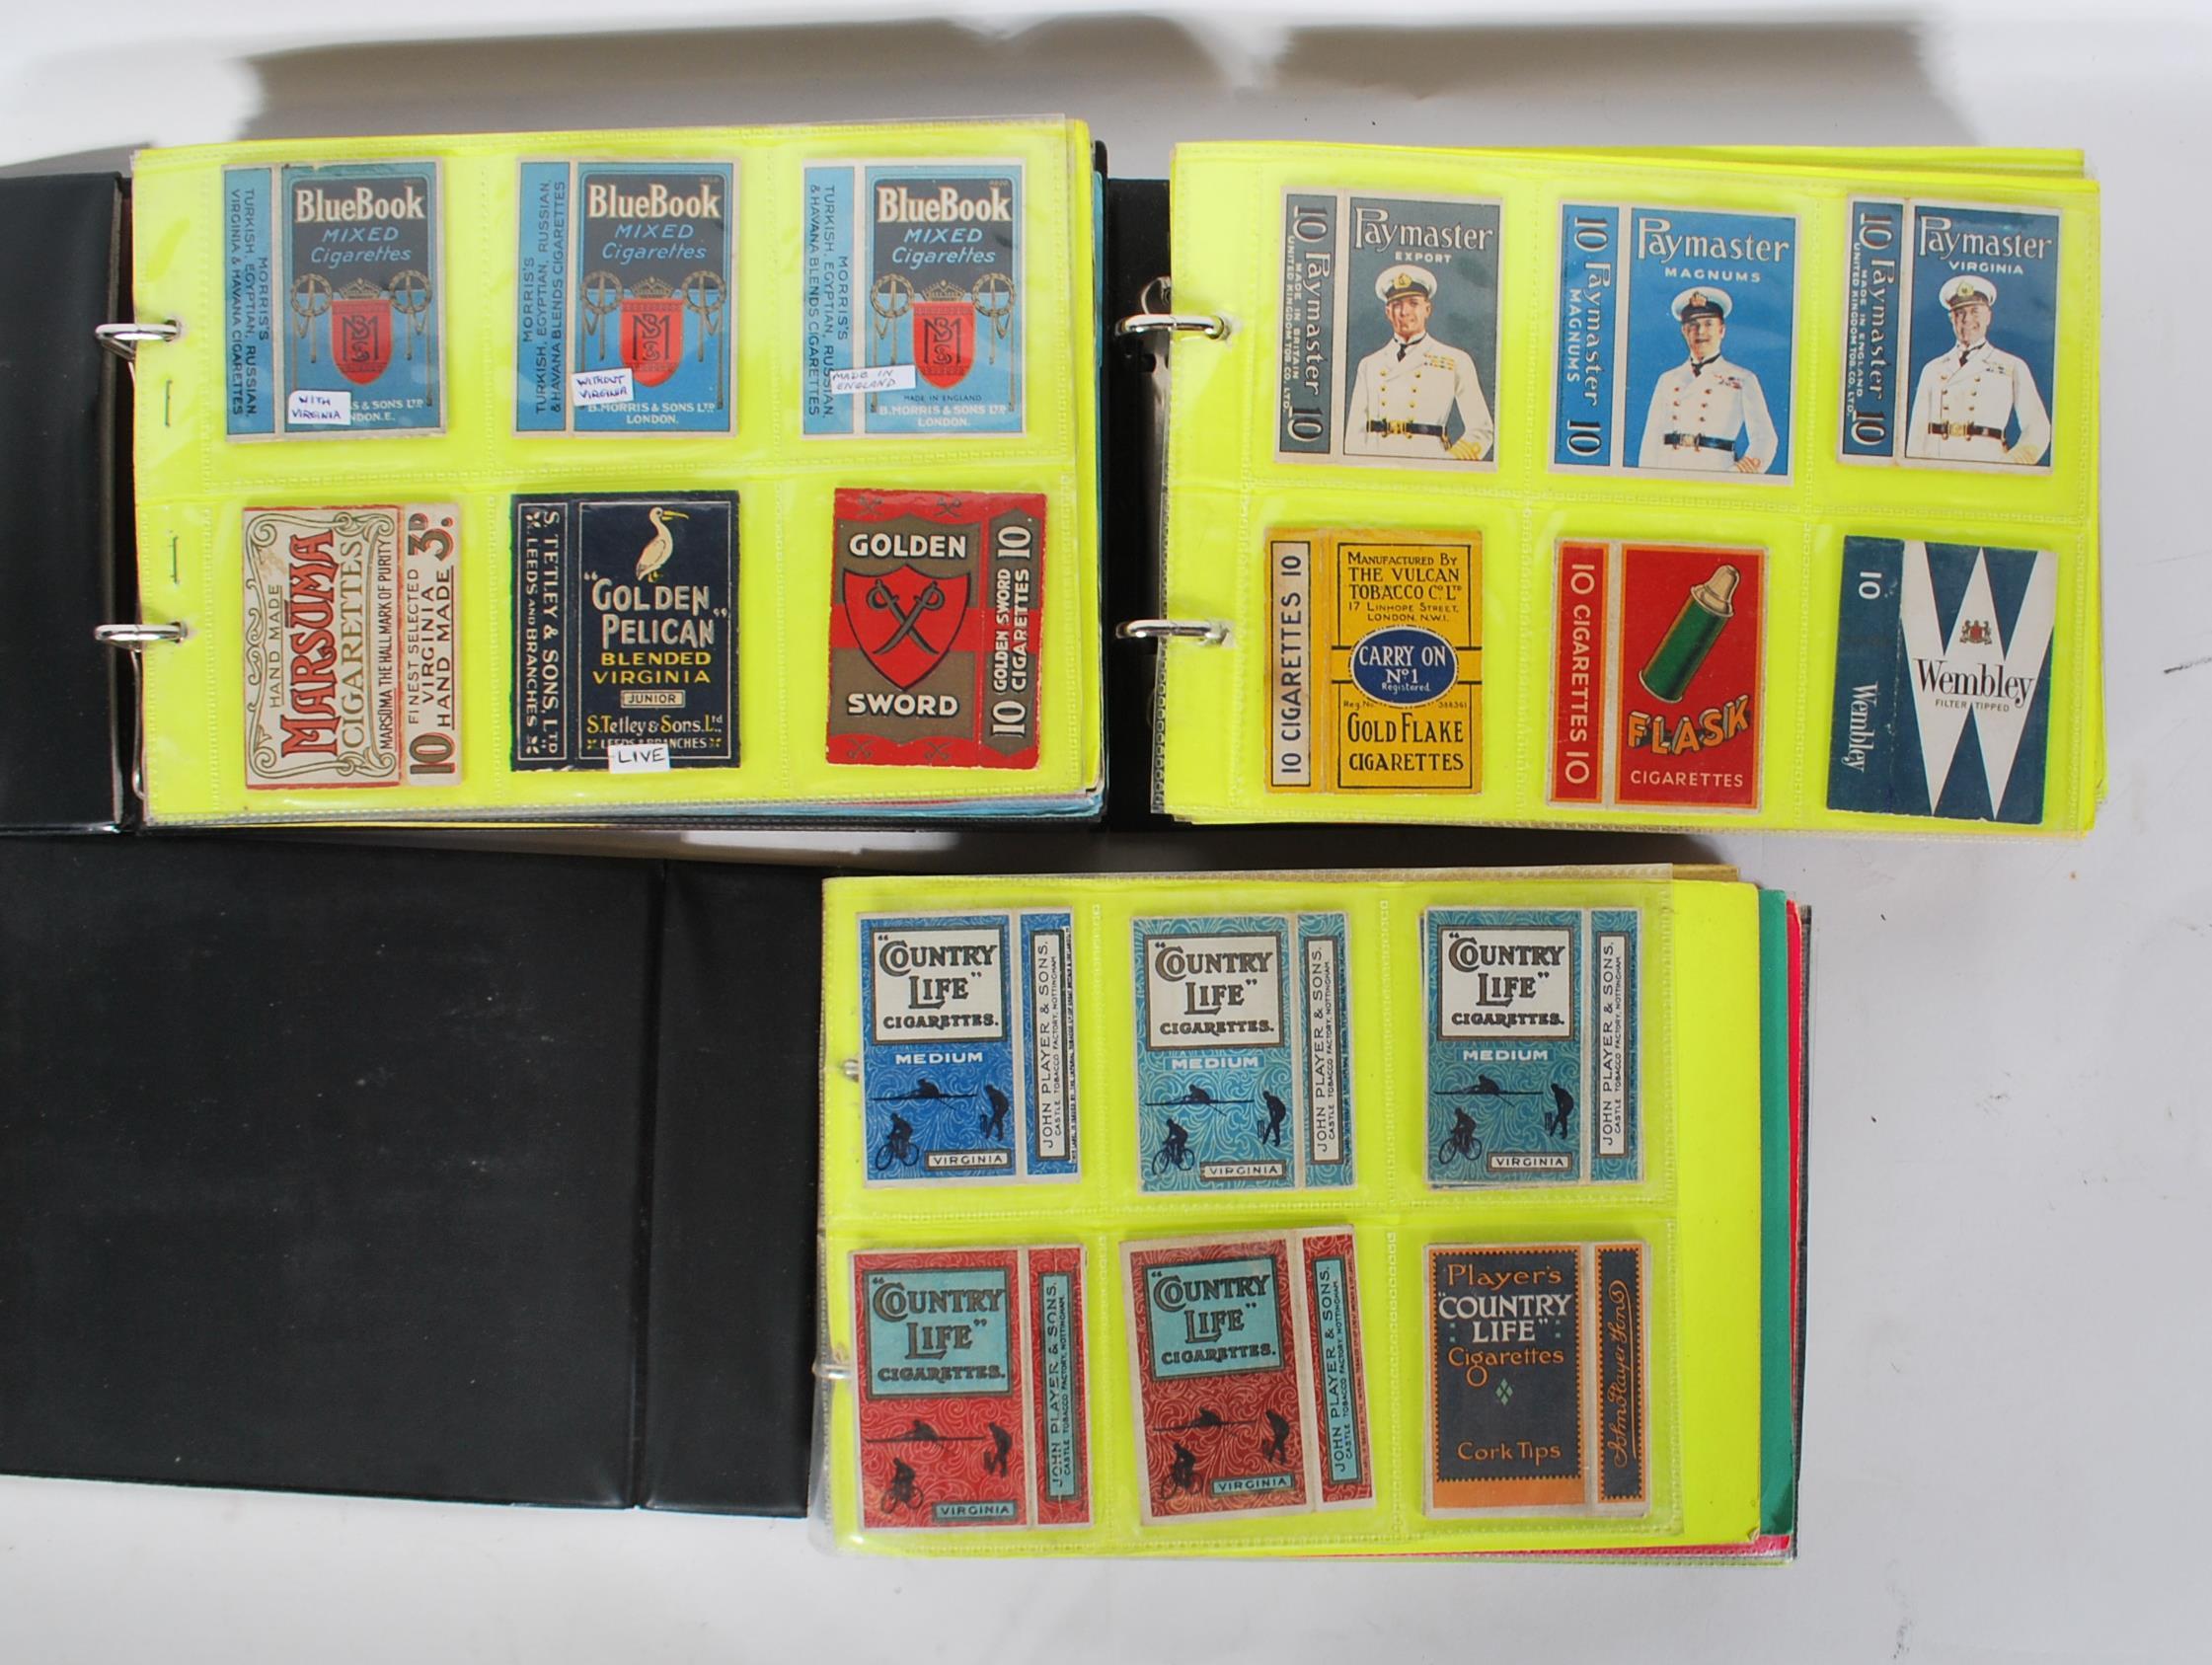 A collection of vintage 20th Century Cigarette packets within plastic sleeves containing many